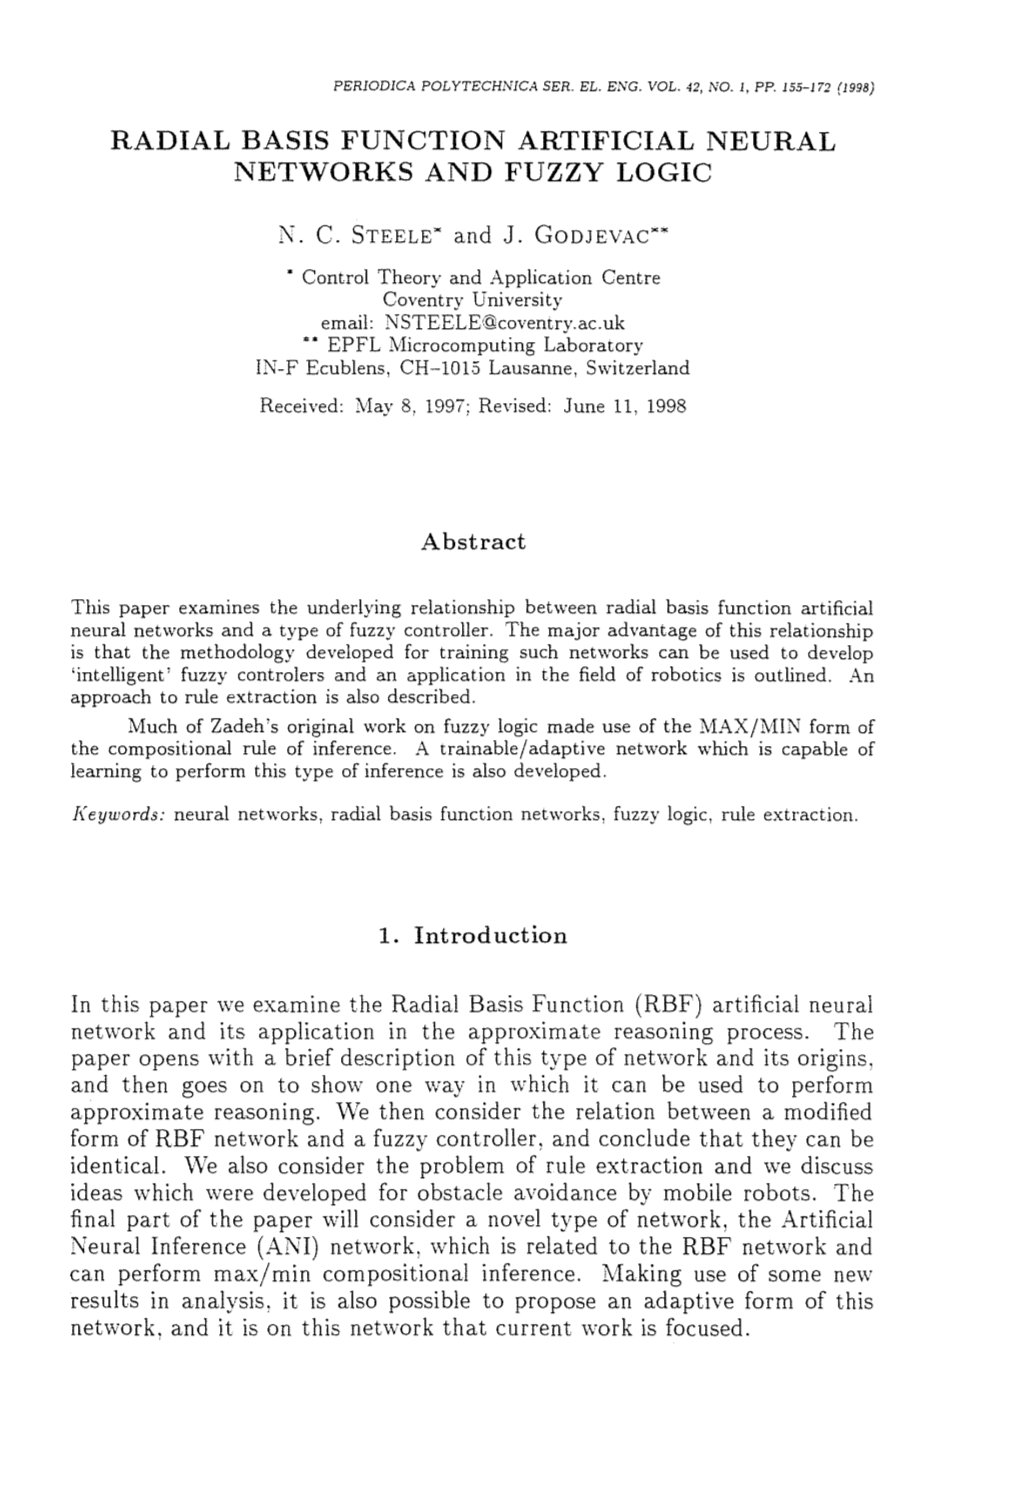 Radial Basis Function Artificial Neural Networks and Fuzzy Logic